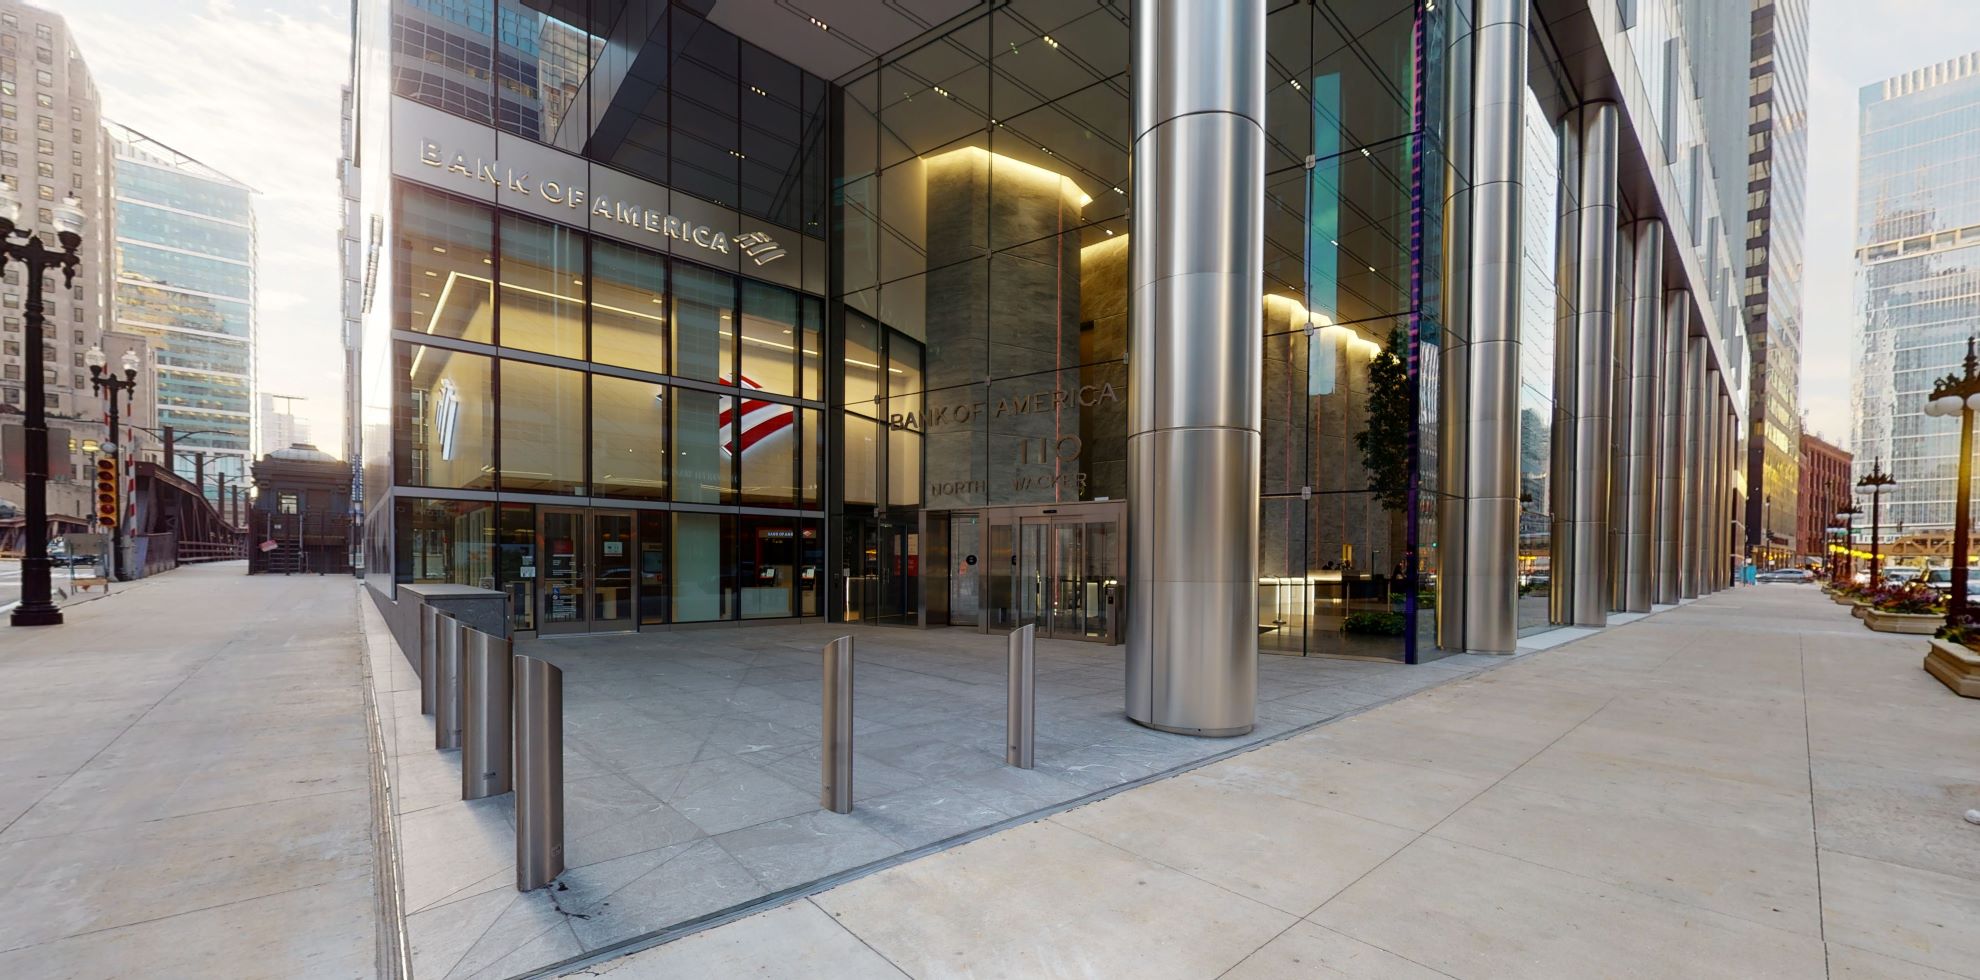 Bank of America Advanced Center with walk-up ATM | 110 N Wacker Dr, Chicago, IL 60606